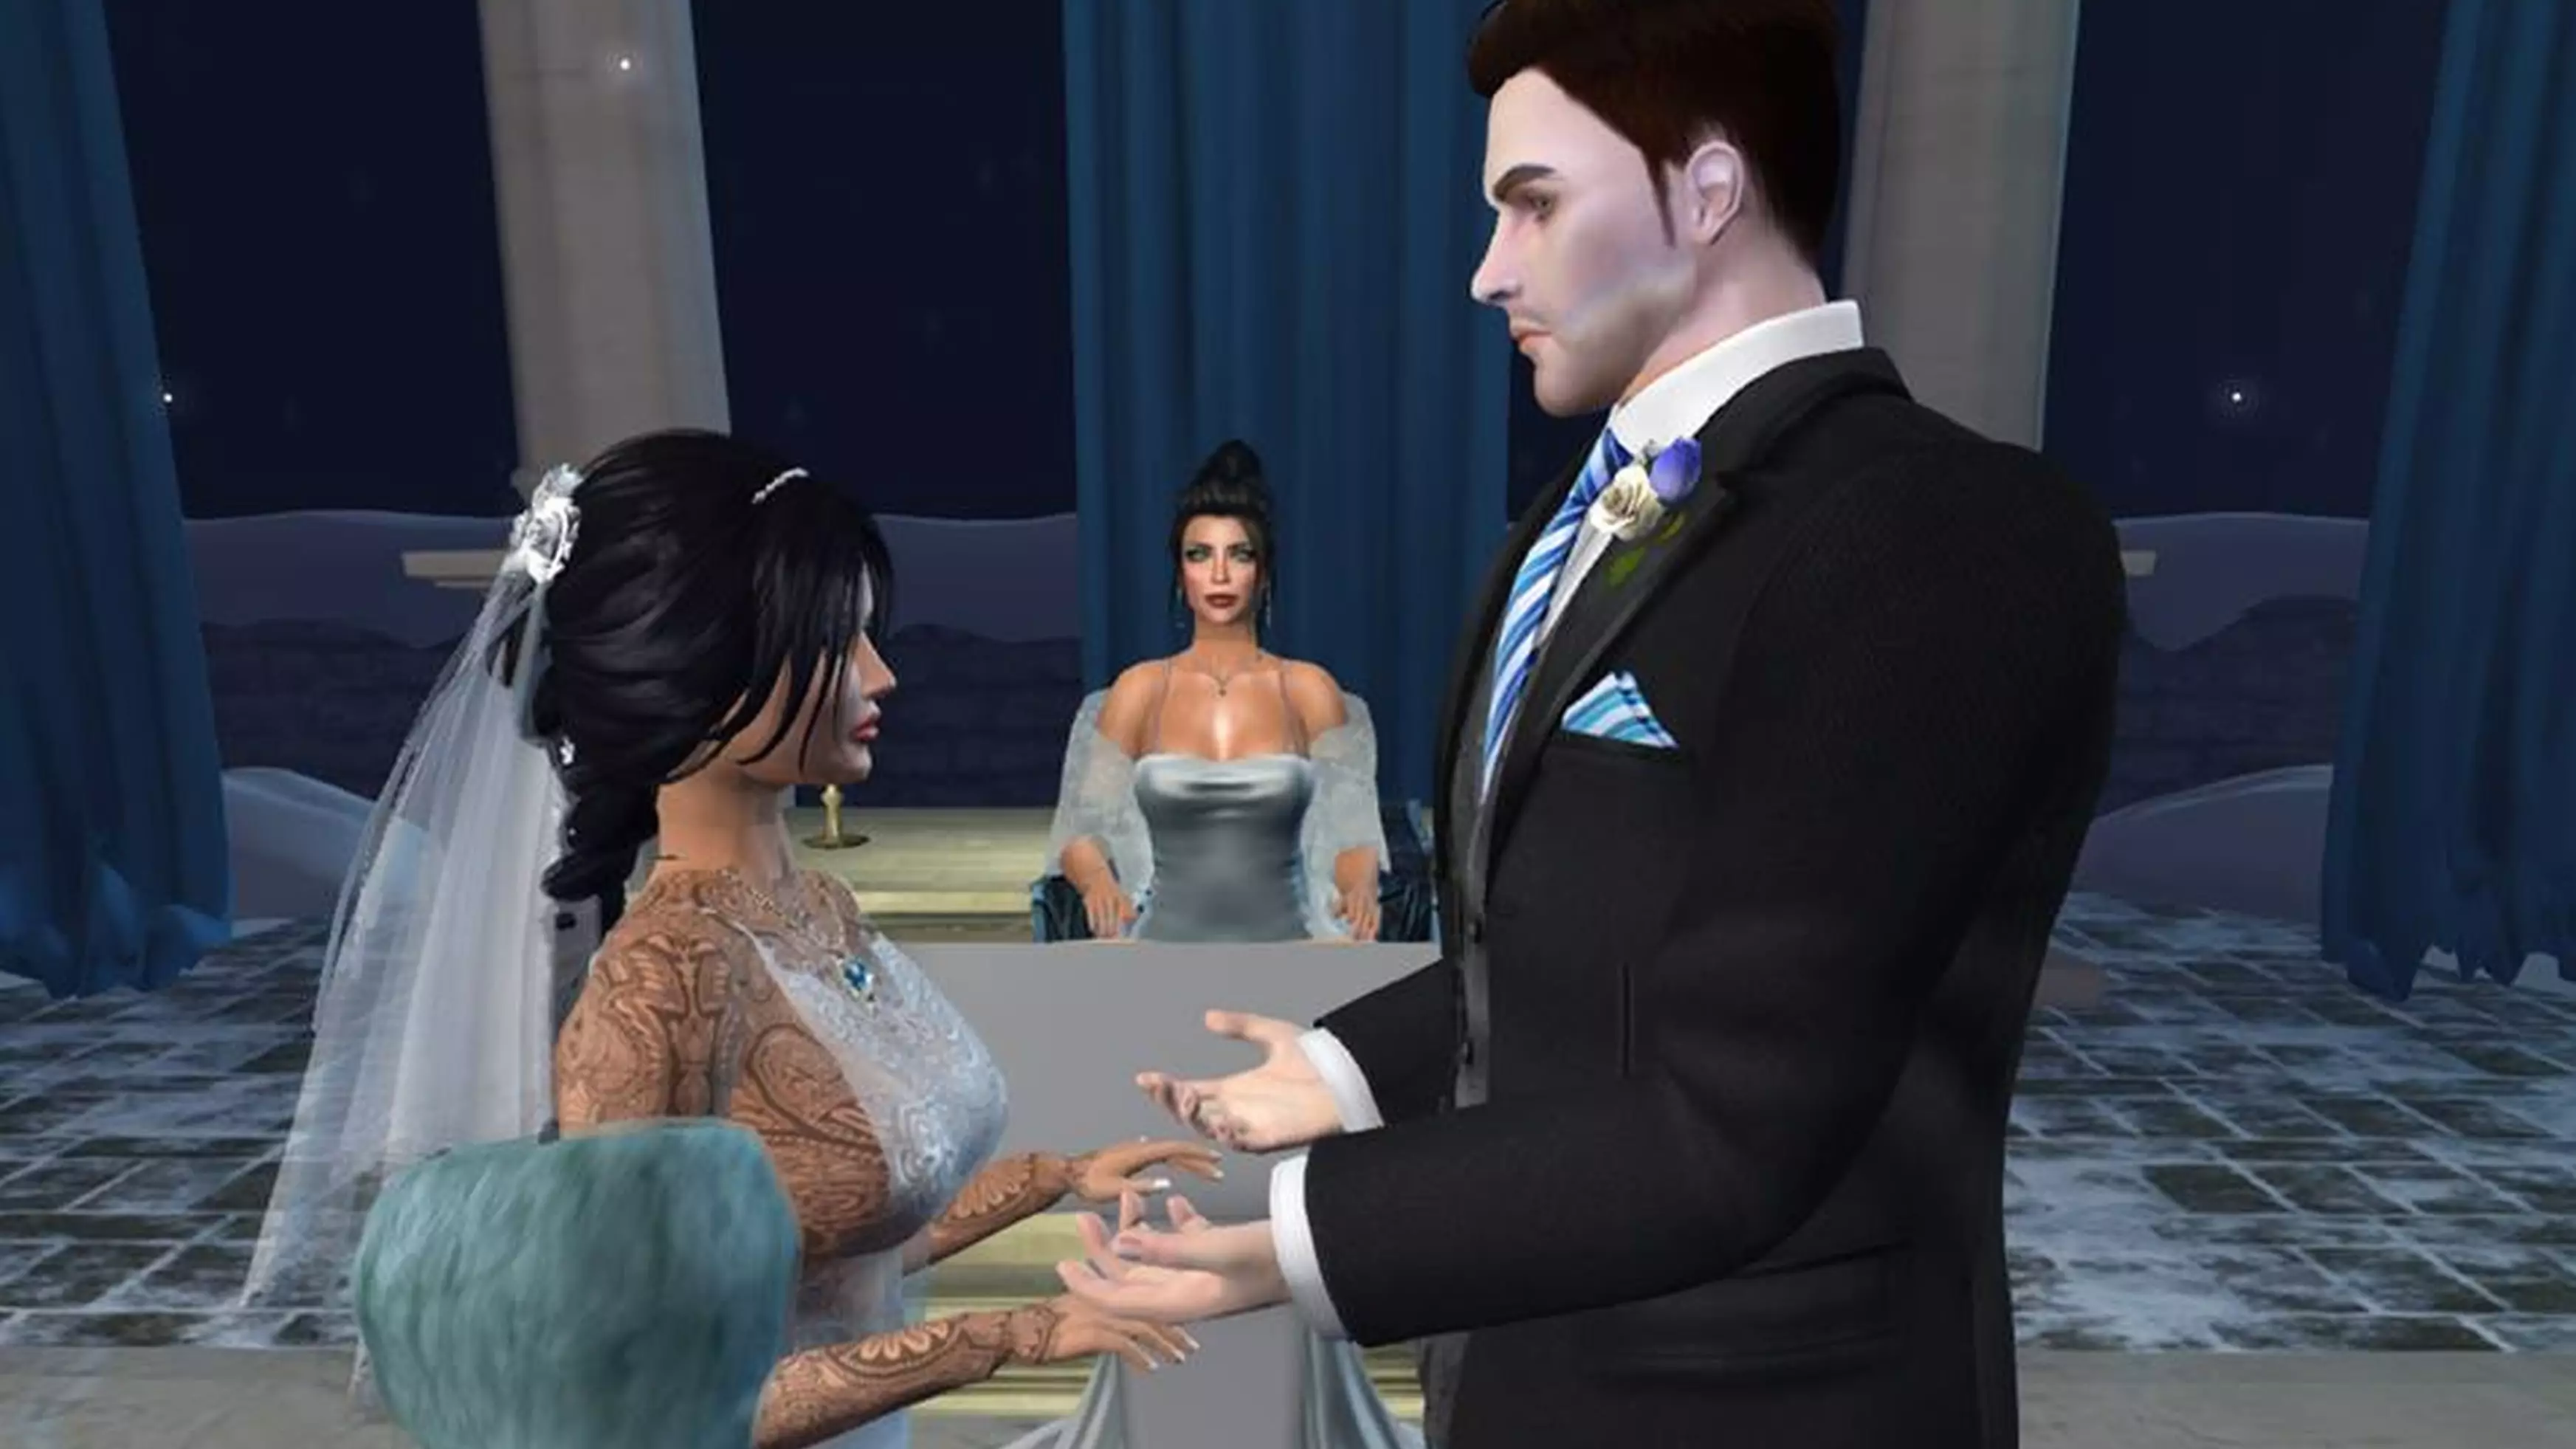 Woman Divorces Husband To Marry Man She Met On Video Game 